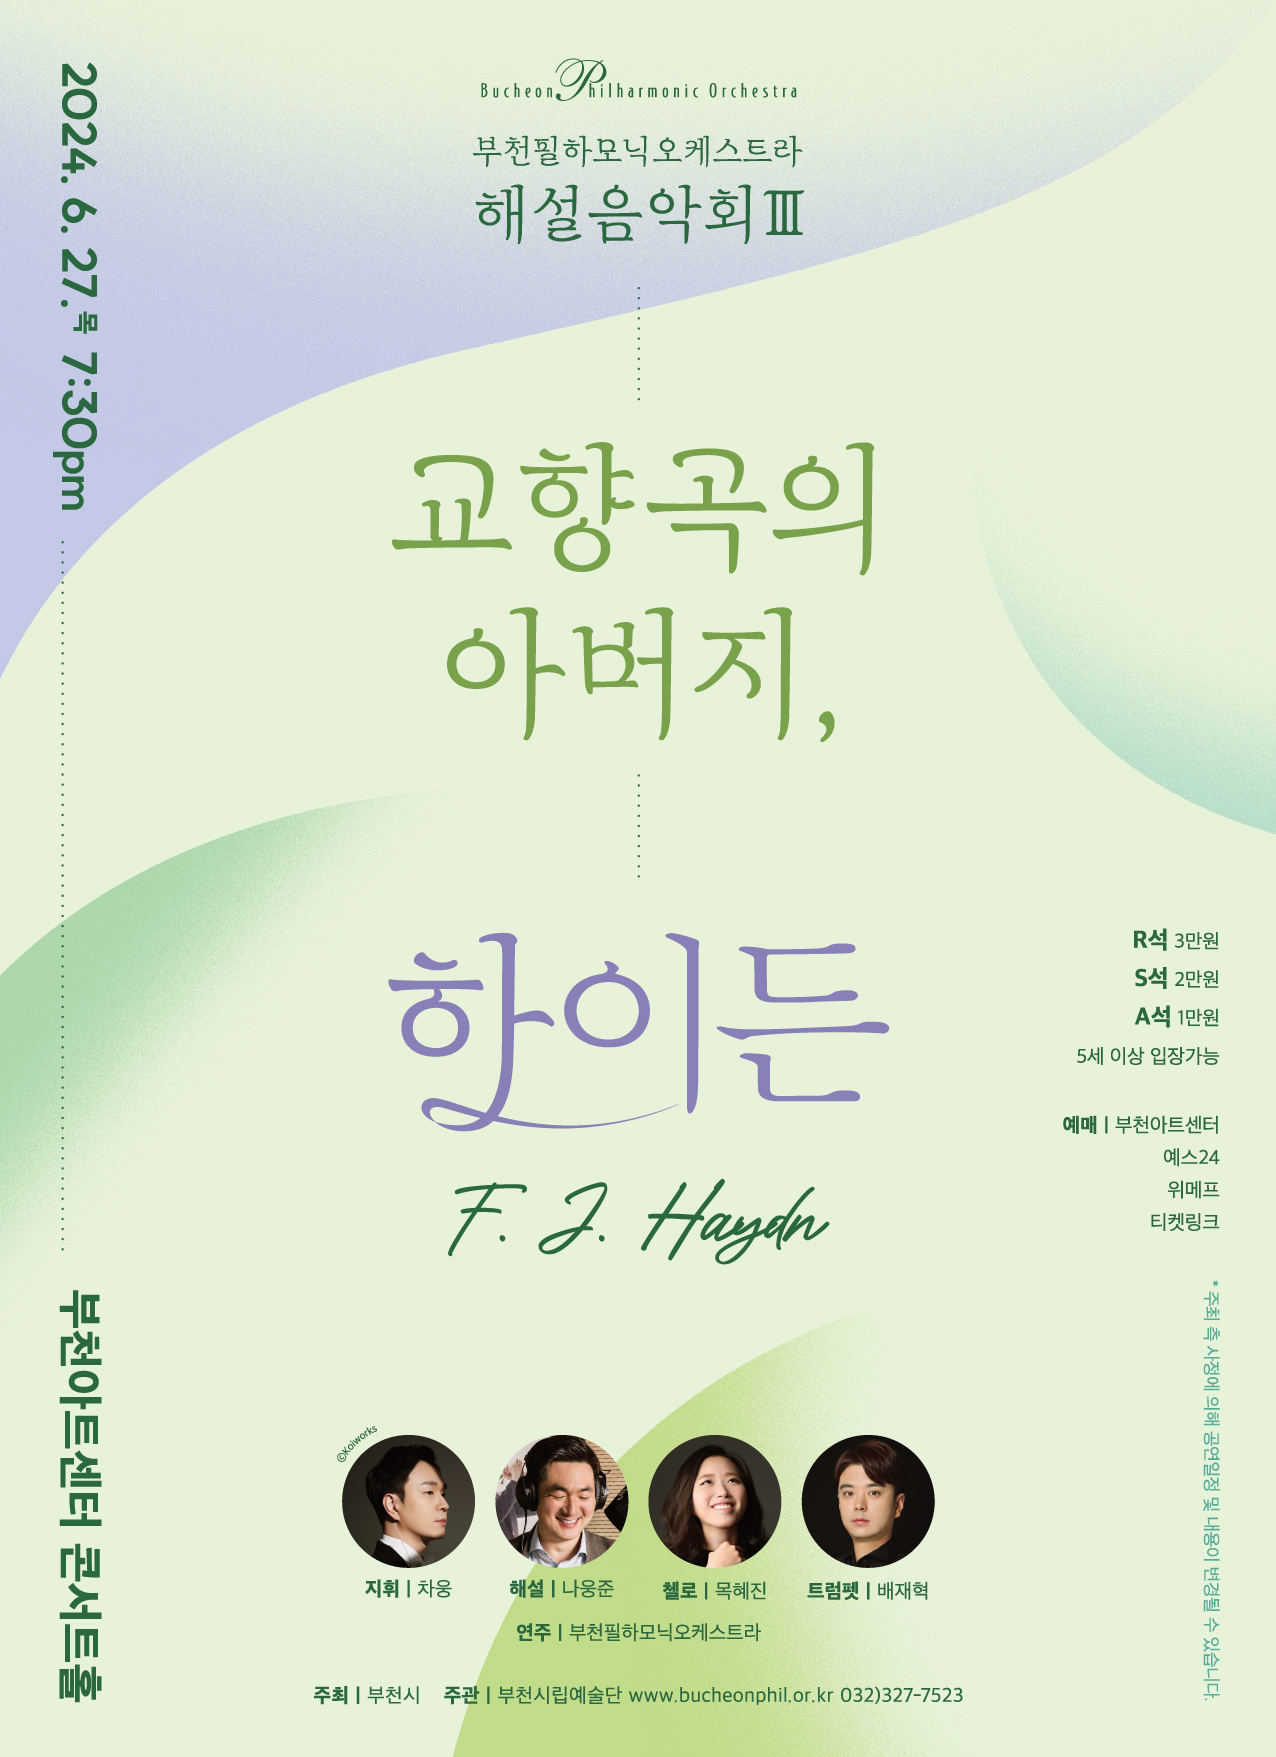 [6.27]Bucheon Philharmonic Orchestra Lecture Concert Ⅲ - F. J. Haydn